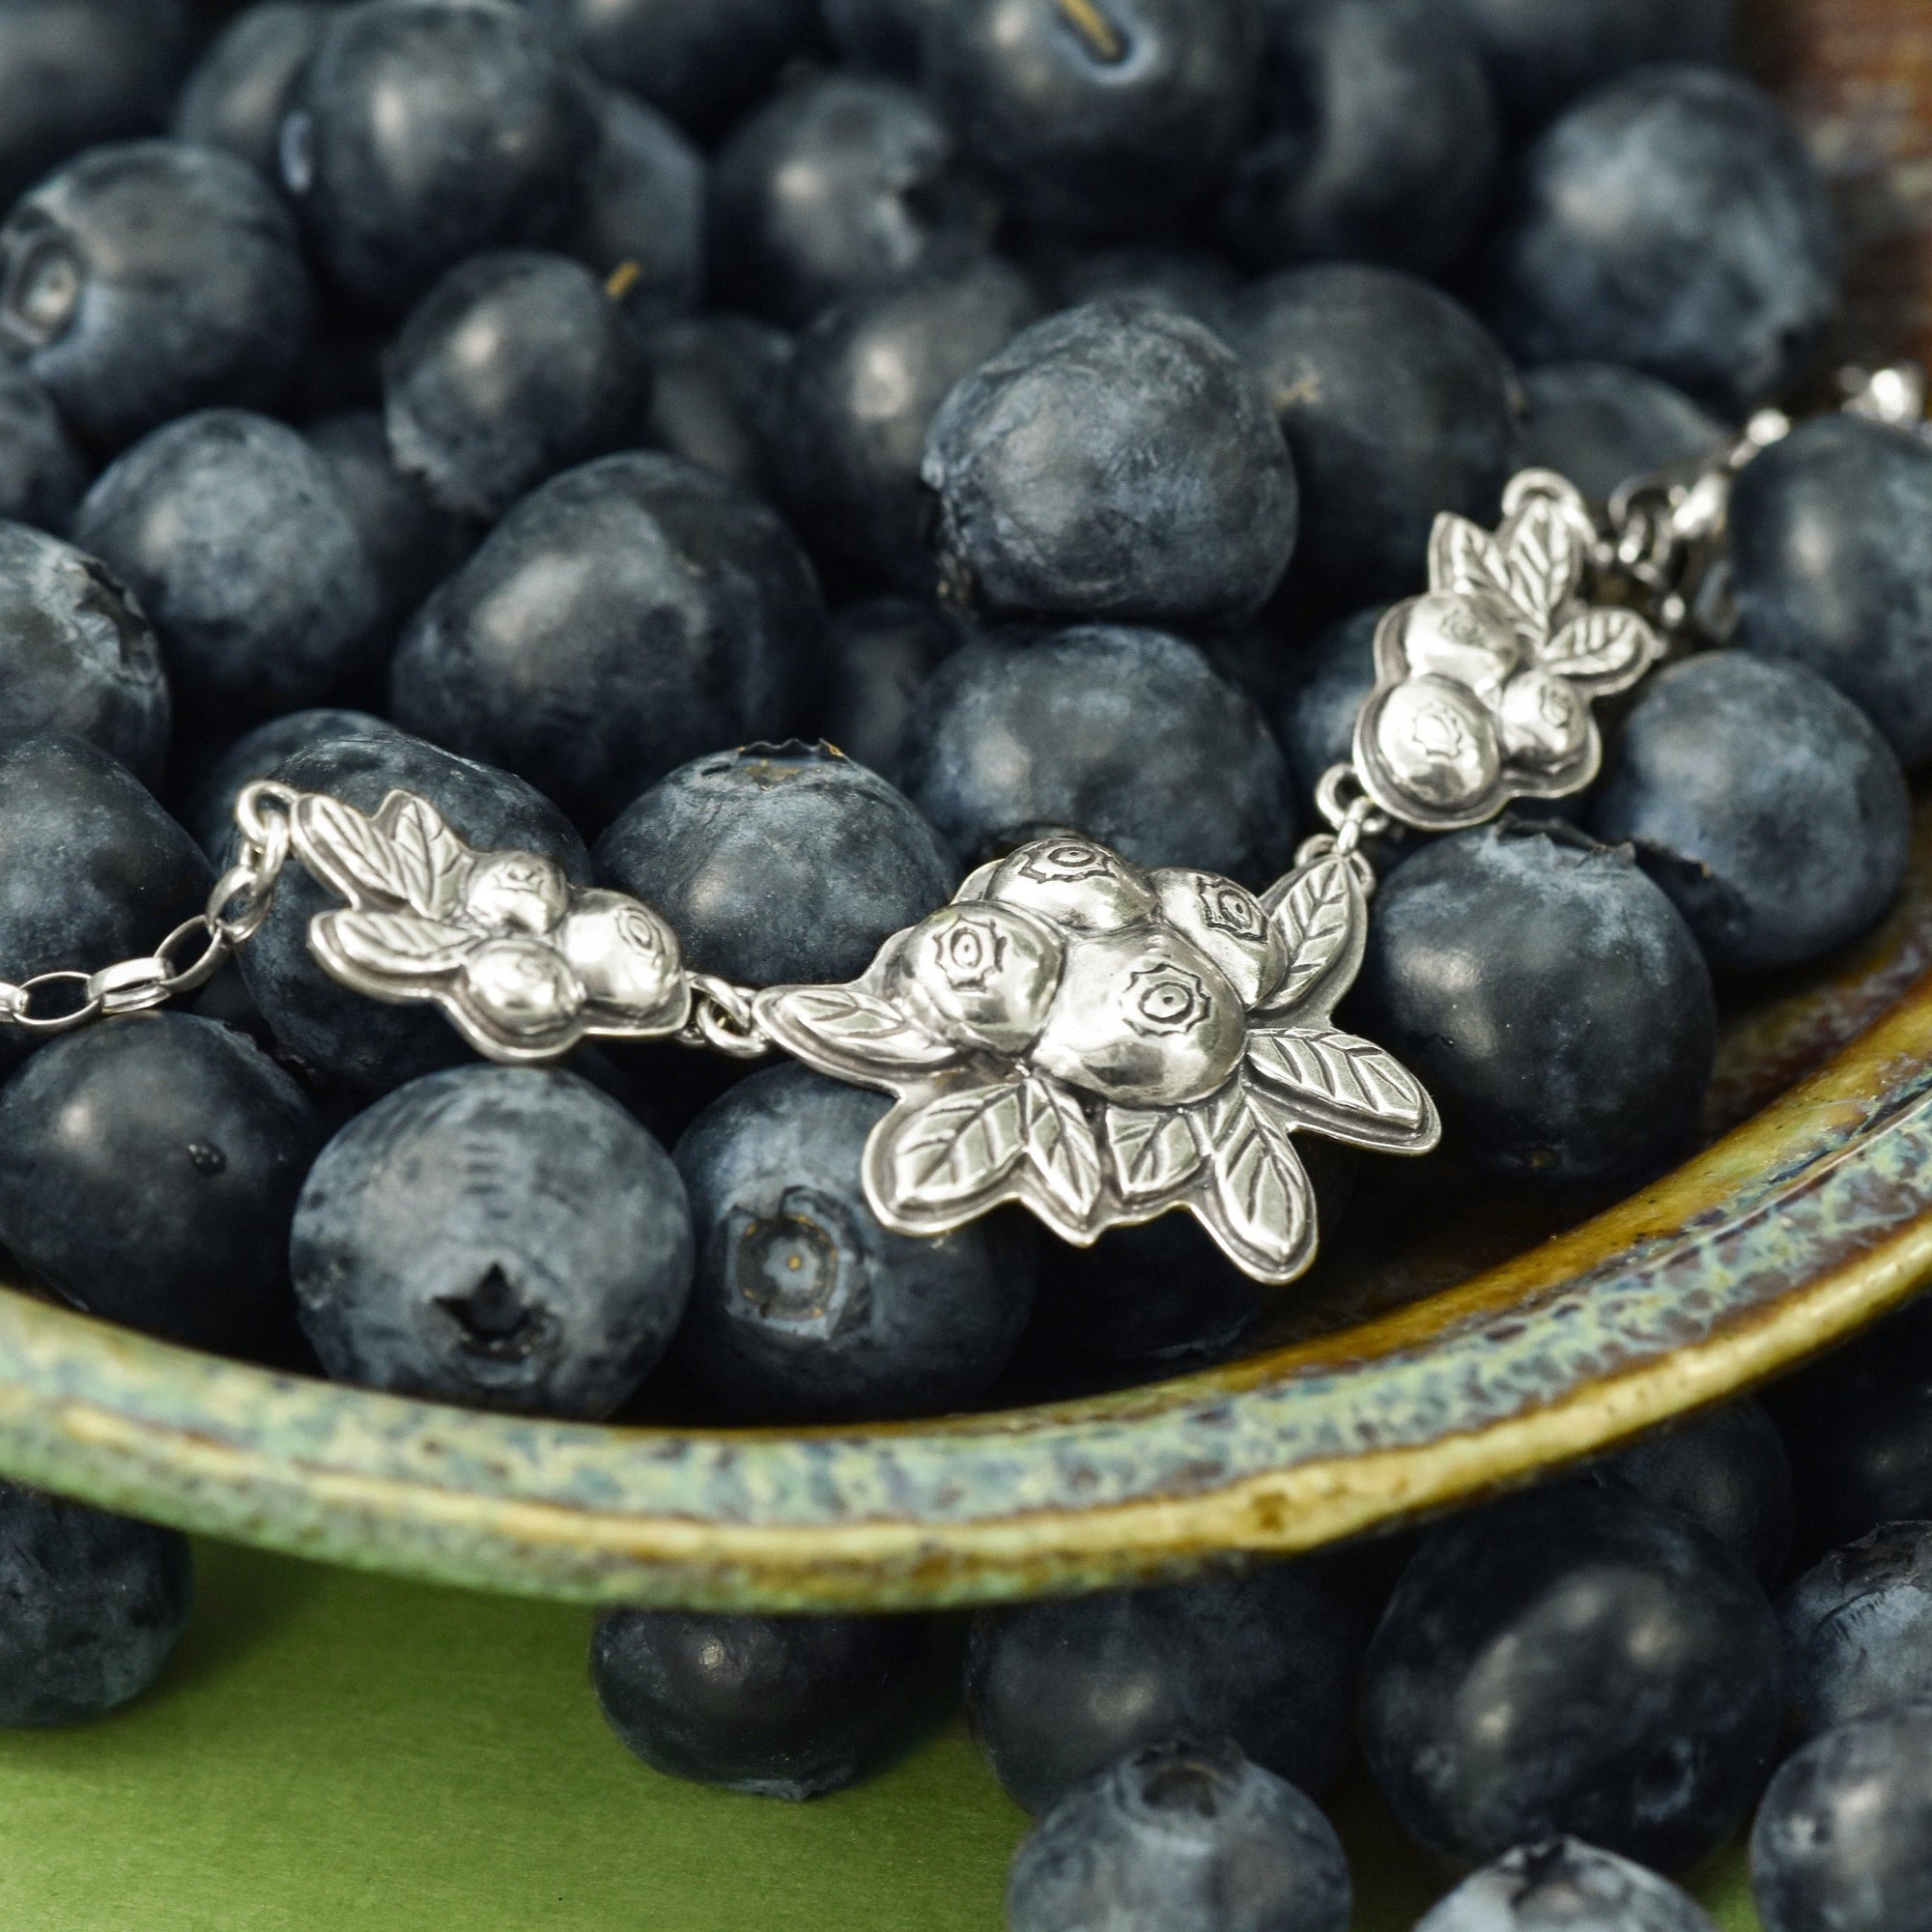 Wild Blueberry Harvest Necklace - Silver Pendant   6545 - handmade by Beth Millner Jewelry